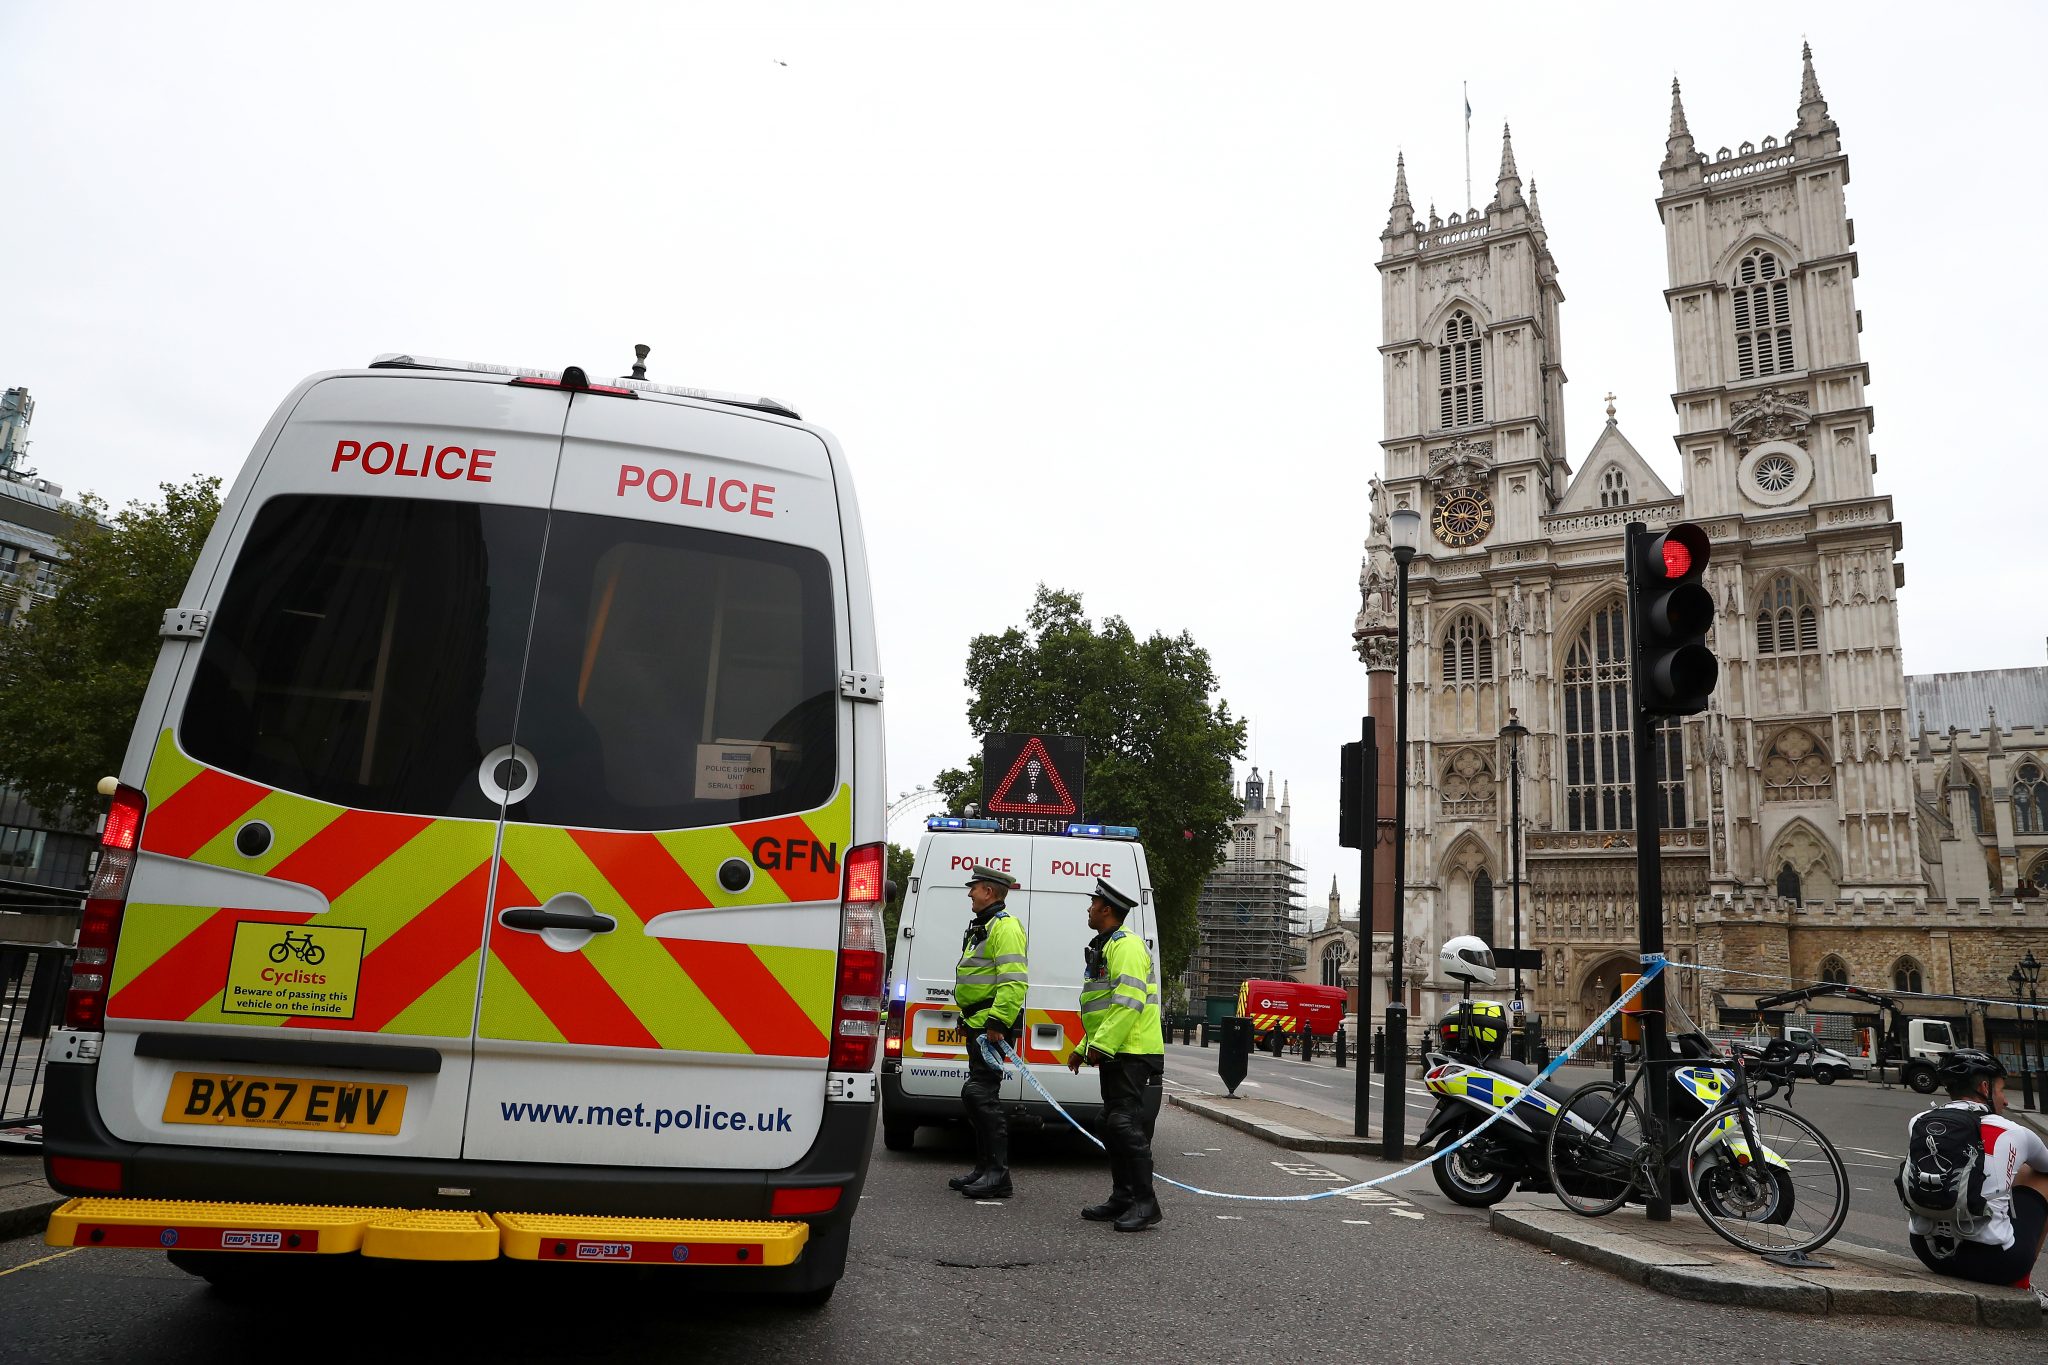 The august 14 London car ramming attack on Parliament illustrates the continuing impact of declining Islamic State’s ideology on disenchanted migrants: Police officers stand at a cordon after a car crashed outside the Houses of Parliament in Westminster, London | Reuters